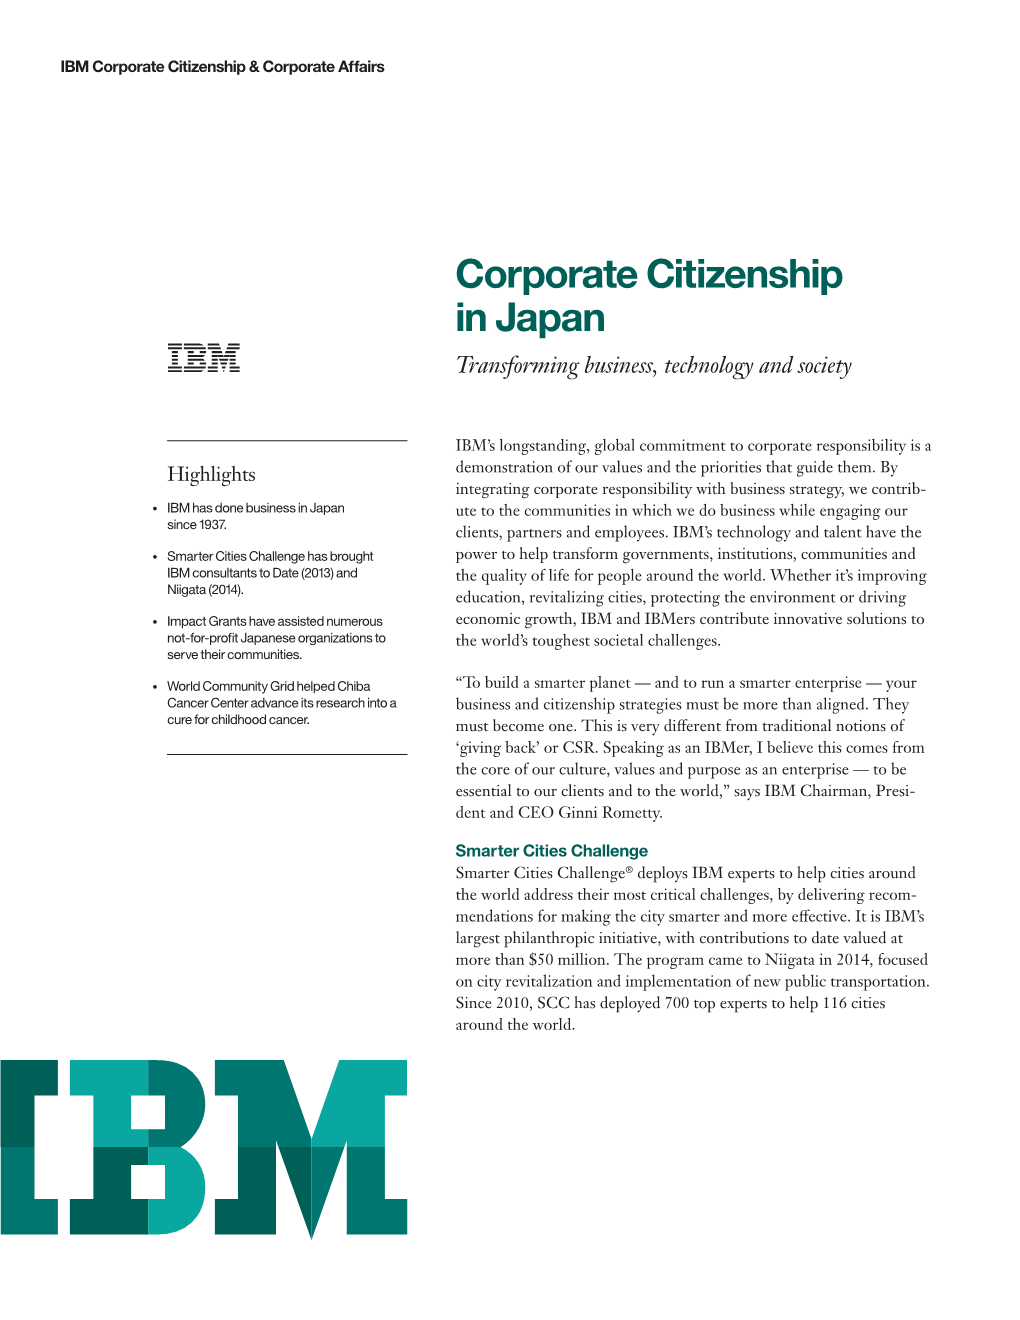 Corporate Citizenship in Japan Transforming Business, Technology and Society